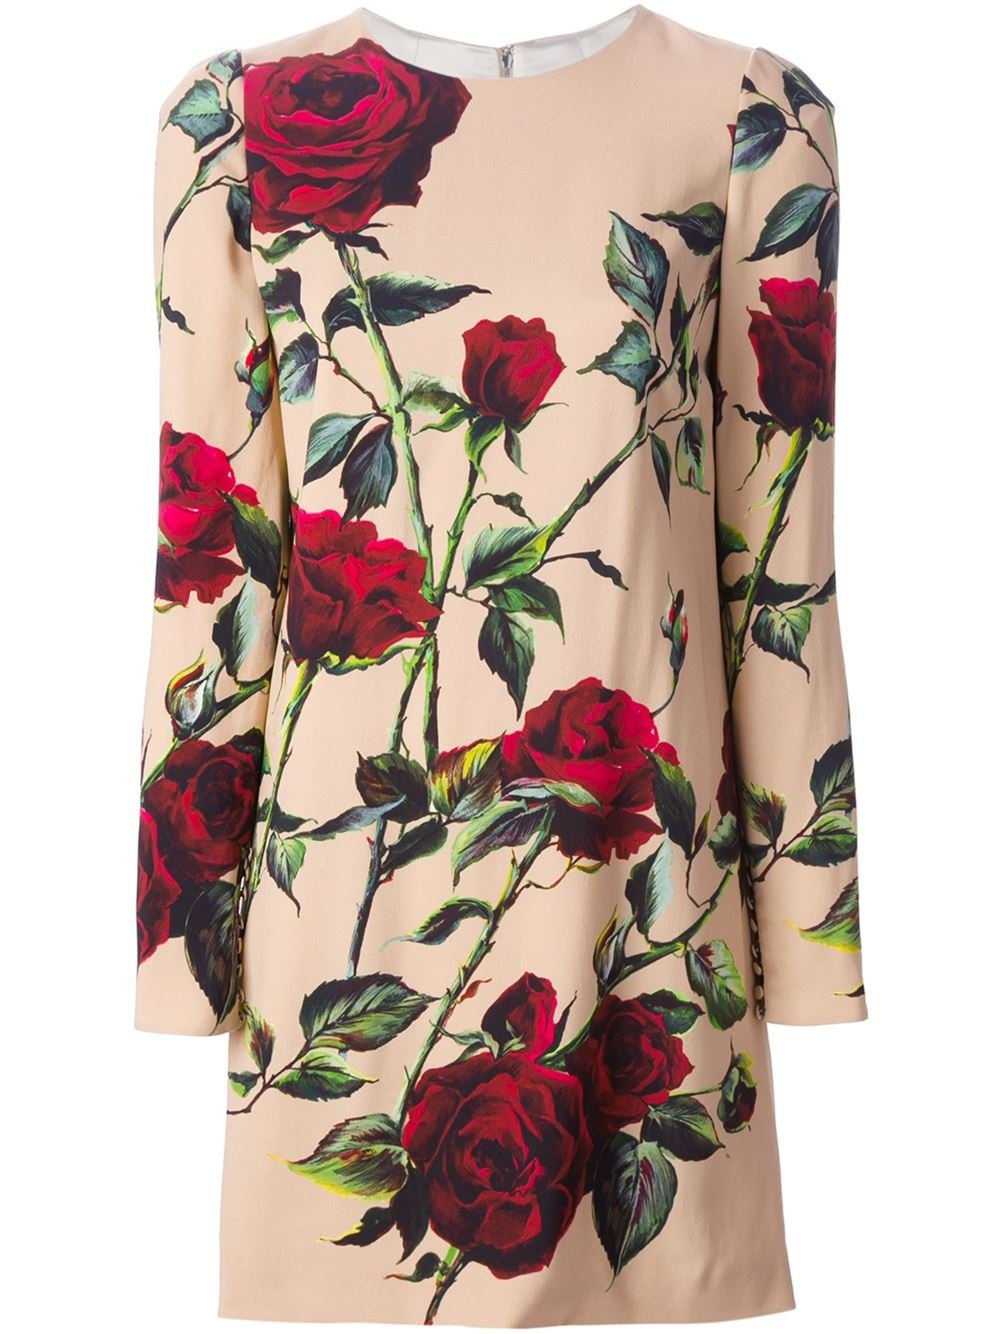 Dolce & Gabbana dress with roses » Wallpapers and Images